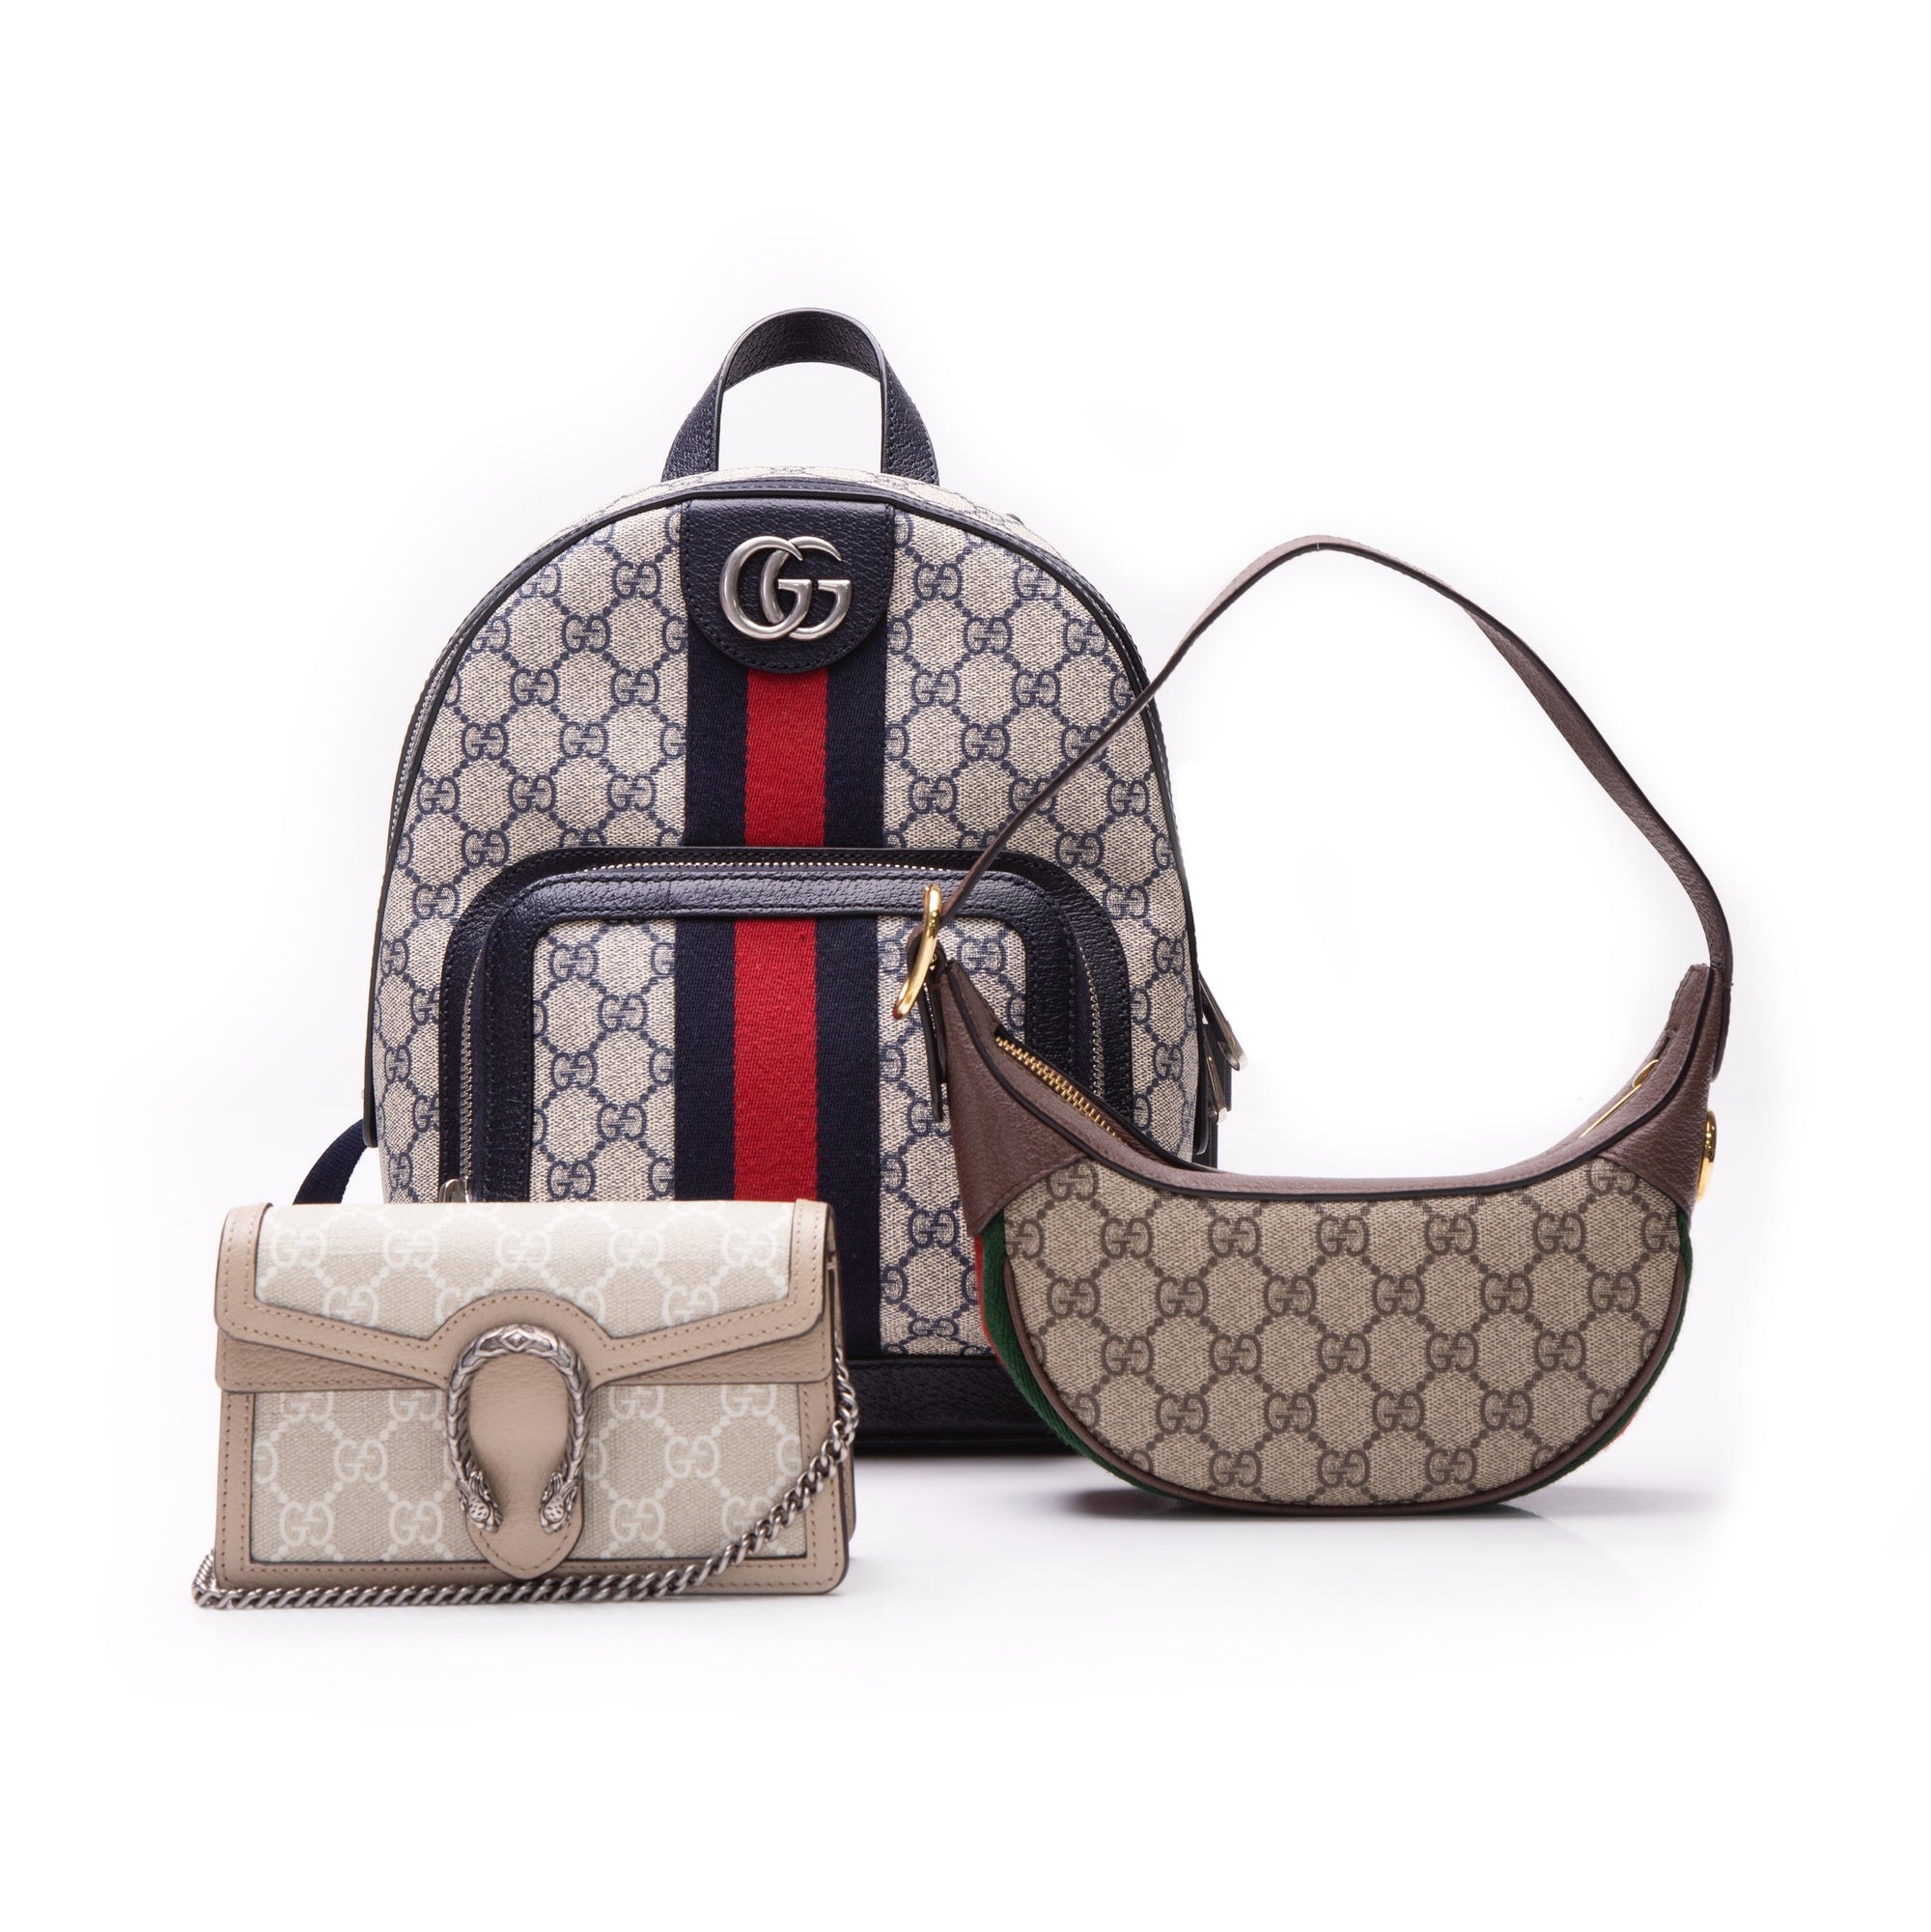 Want affordable Gucci, Chanel and Louis Vuitton? Luxe Crush provides style  without commitment - Lakewood/East Dallas